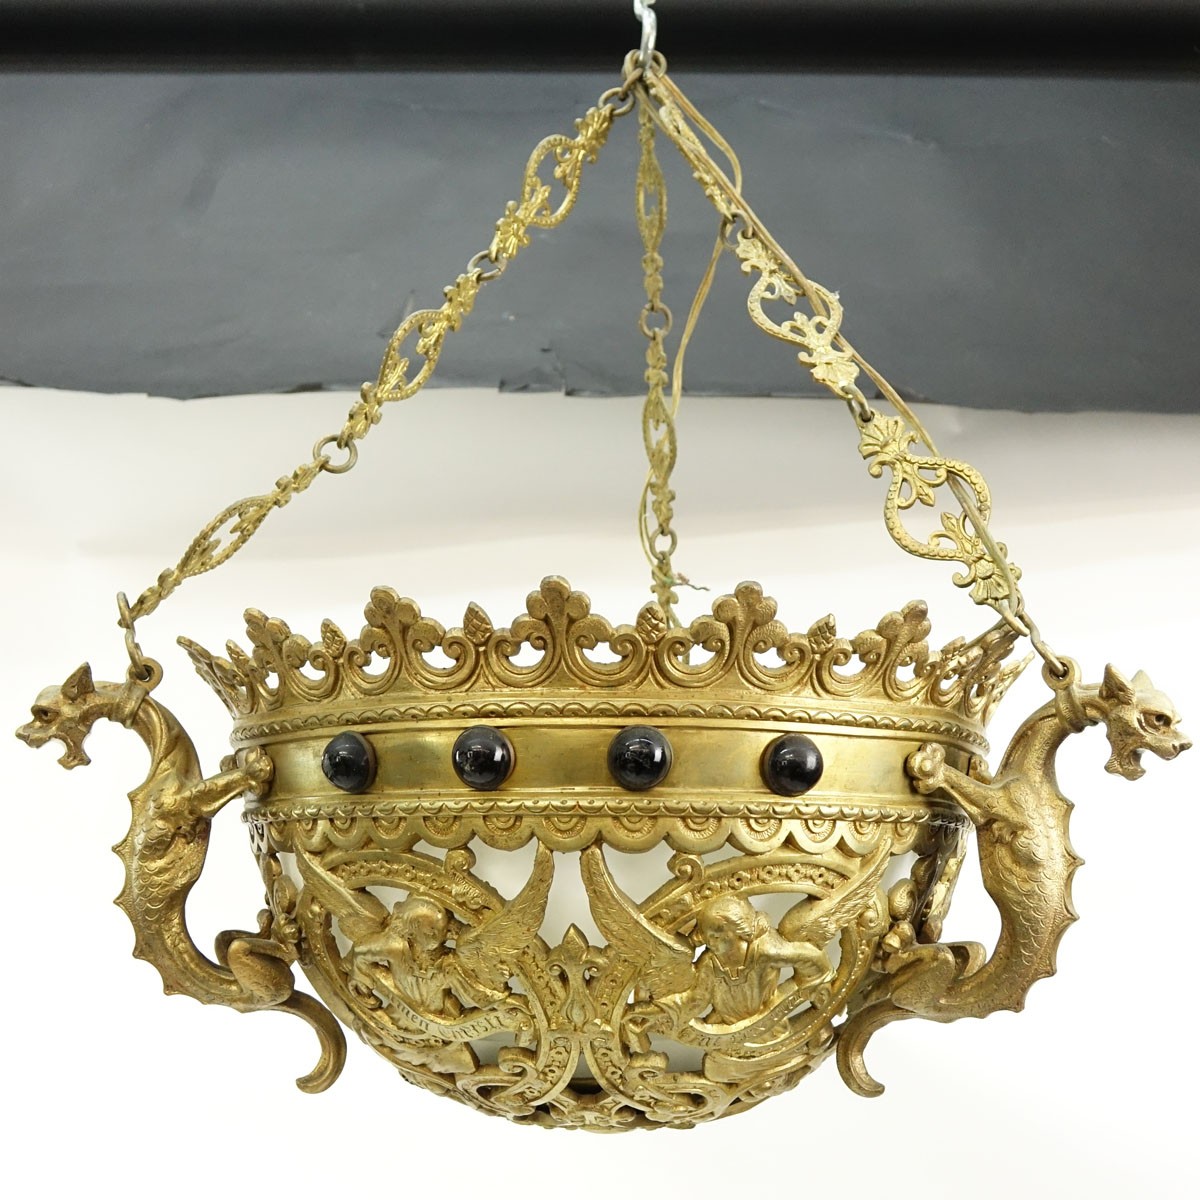 Antique Gothic Style Figural Gilt Bronze Dome Chandelier with Applied Glass Beads. Rubbing to gilt, insert has a loss.